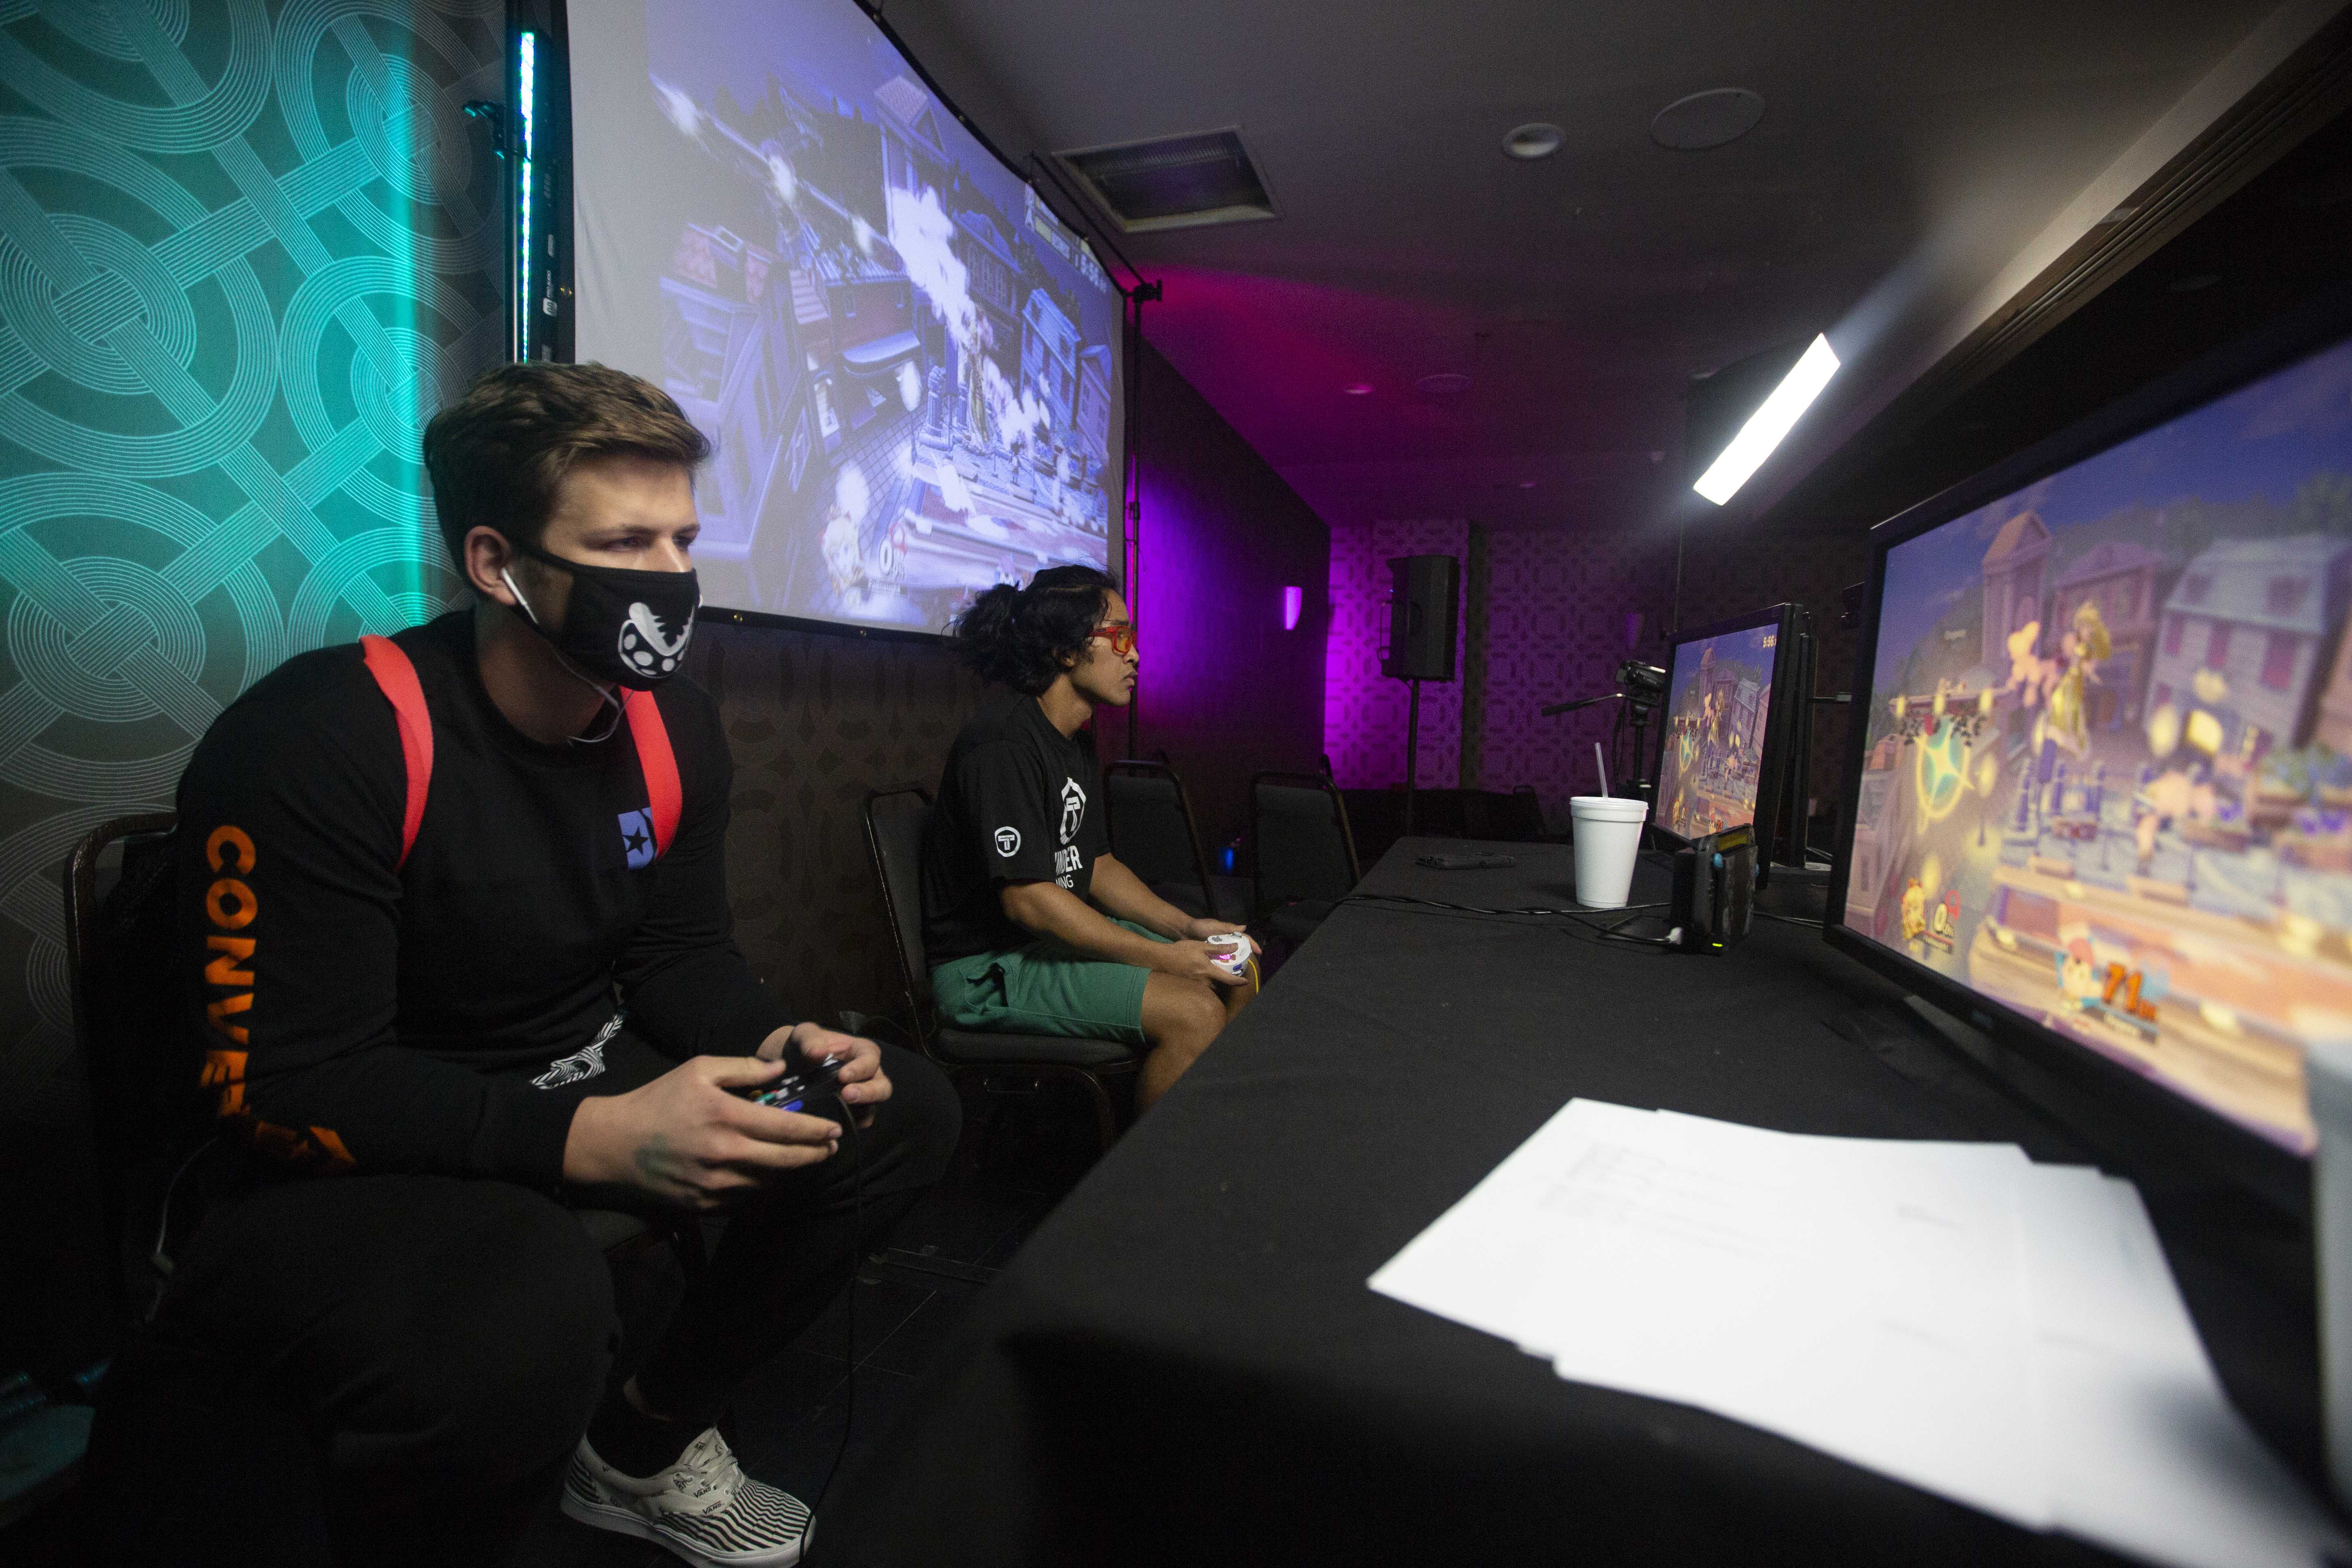 From left to right: Spencer Garner and Antony Hoo compete in the last one-on-one match during the Super Smash Fest tournament at the Radisson Hotel on Saturday, Sept. 28, 2019. (Larry Valenzuela/The Collegian)